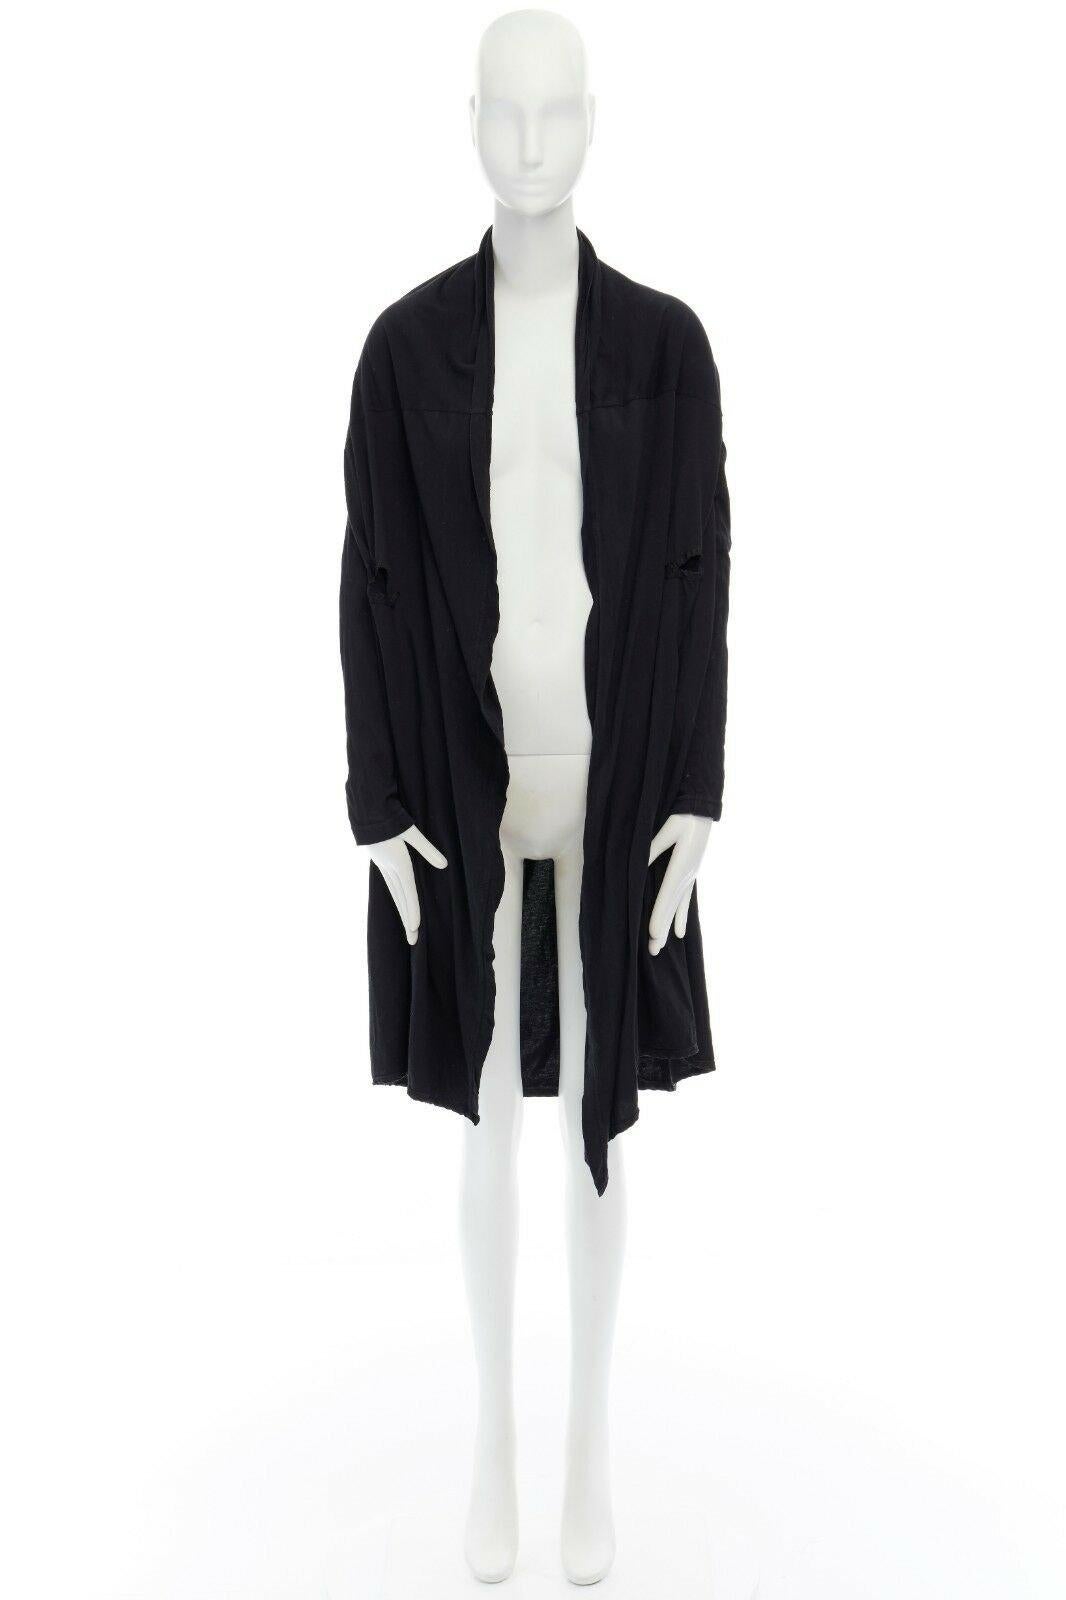 FRAPBOIS JAPAN black cotton long length draped cardigan jacket JP1 S 
Reference: EACN/A00072 
Brand: Frapbois 
Material: Cotton 
Color: Black 
Pattern: Solid 
Closure: Zip 
Extra Detail: 100% wool. Black. Minimal pants. Concealed button and zip fly